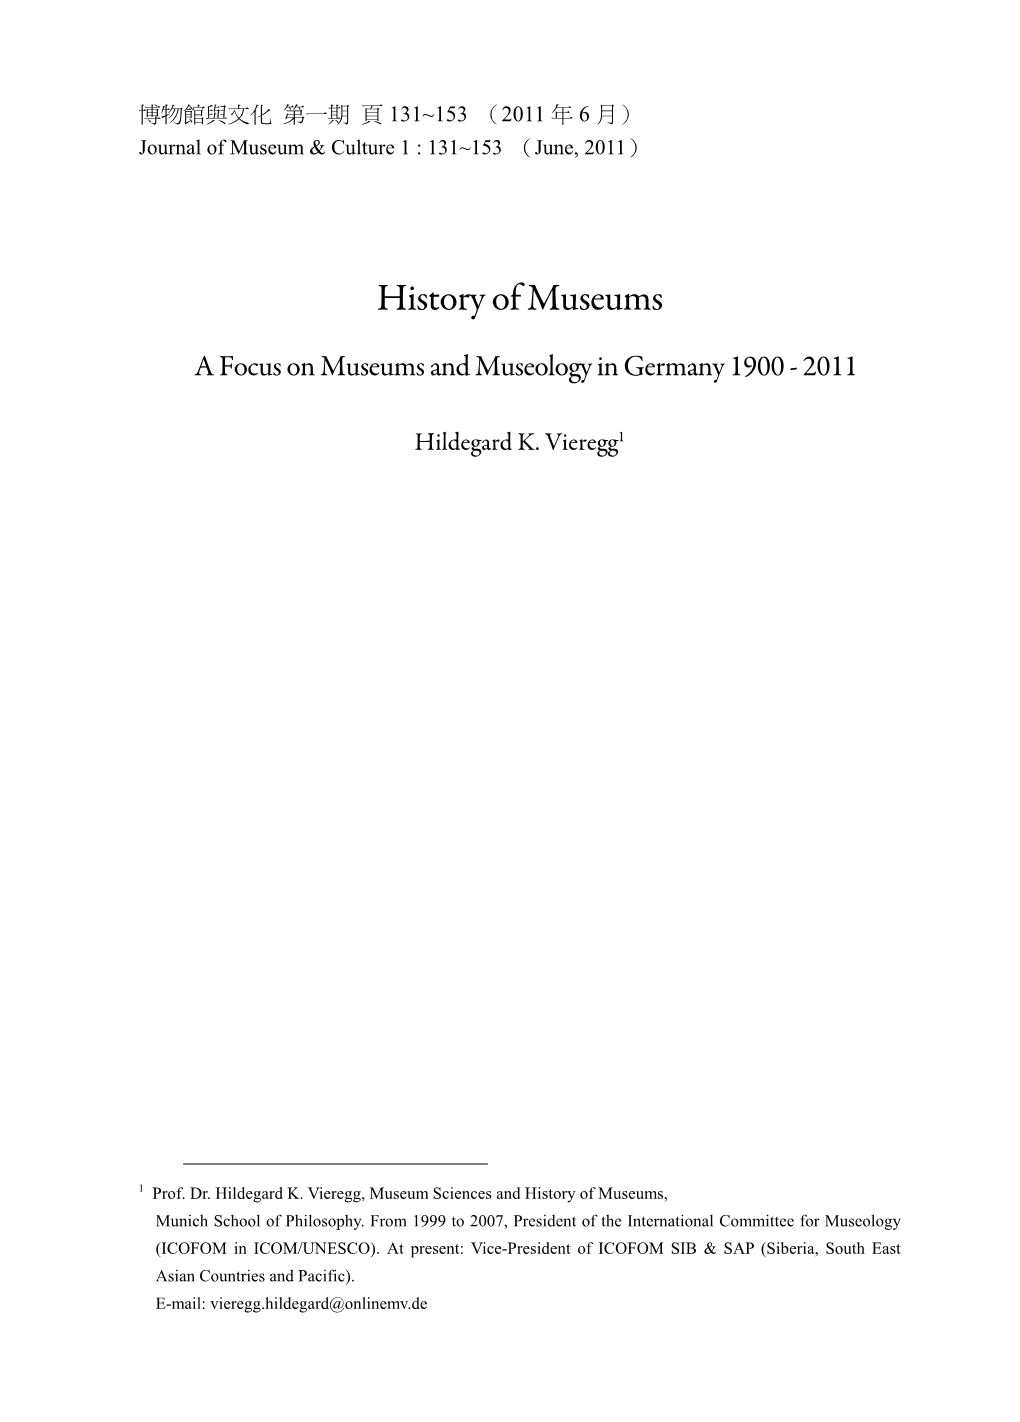 History of Museums